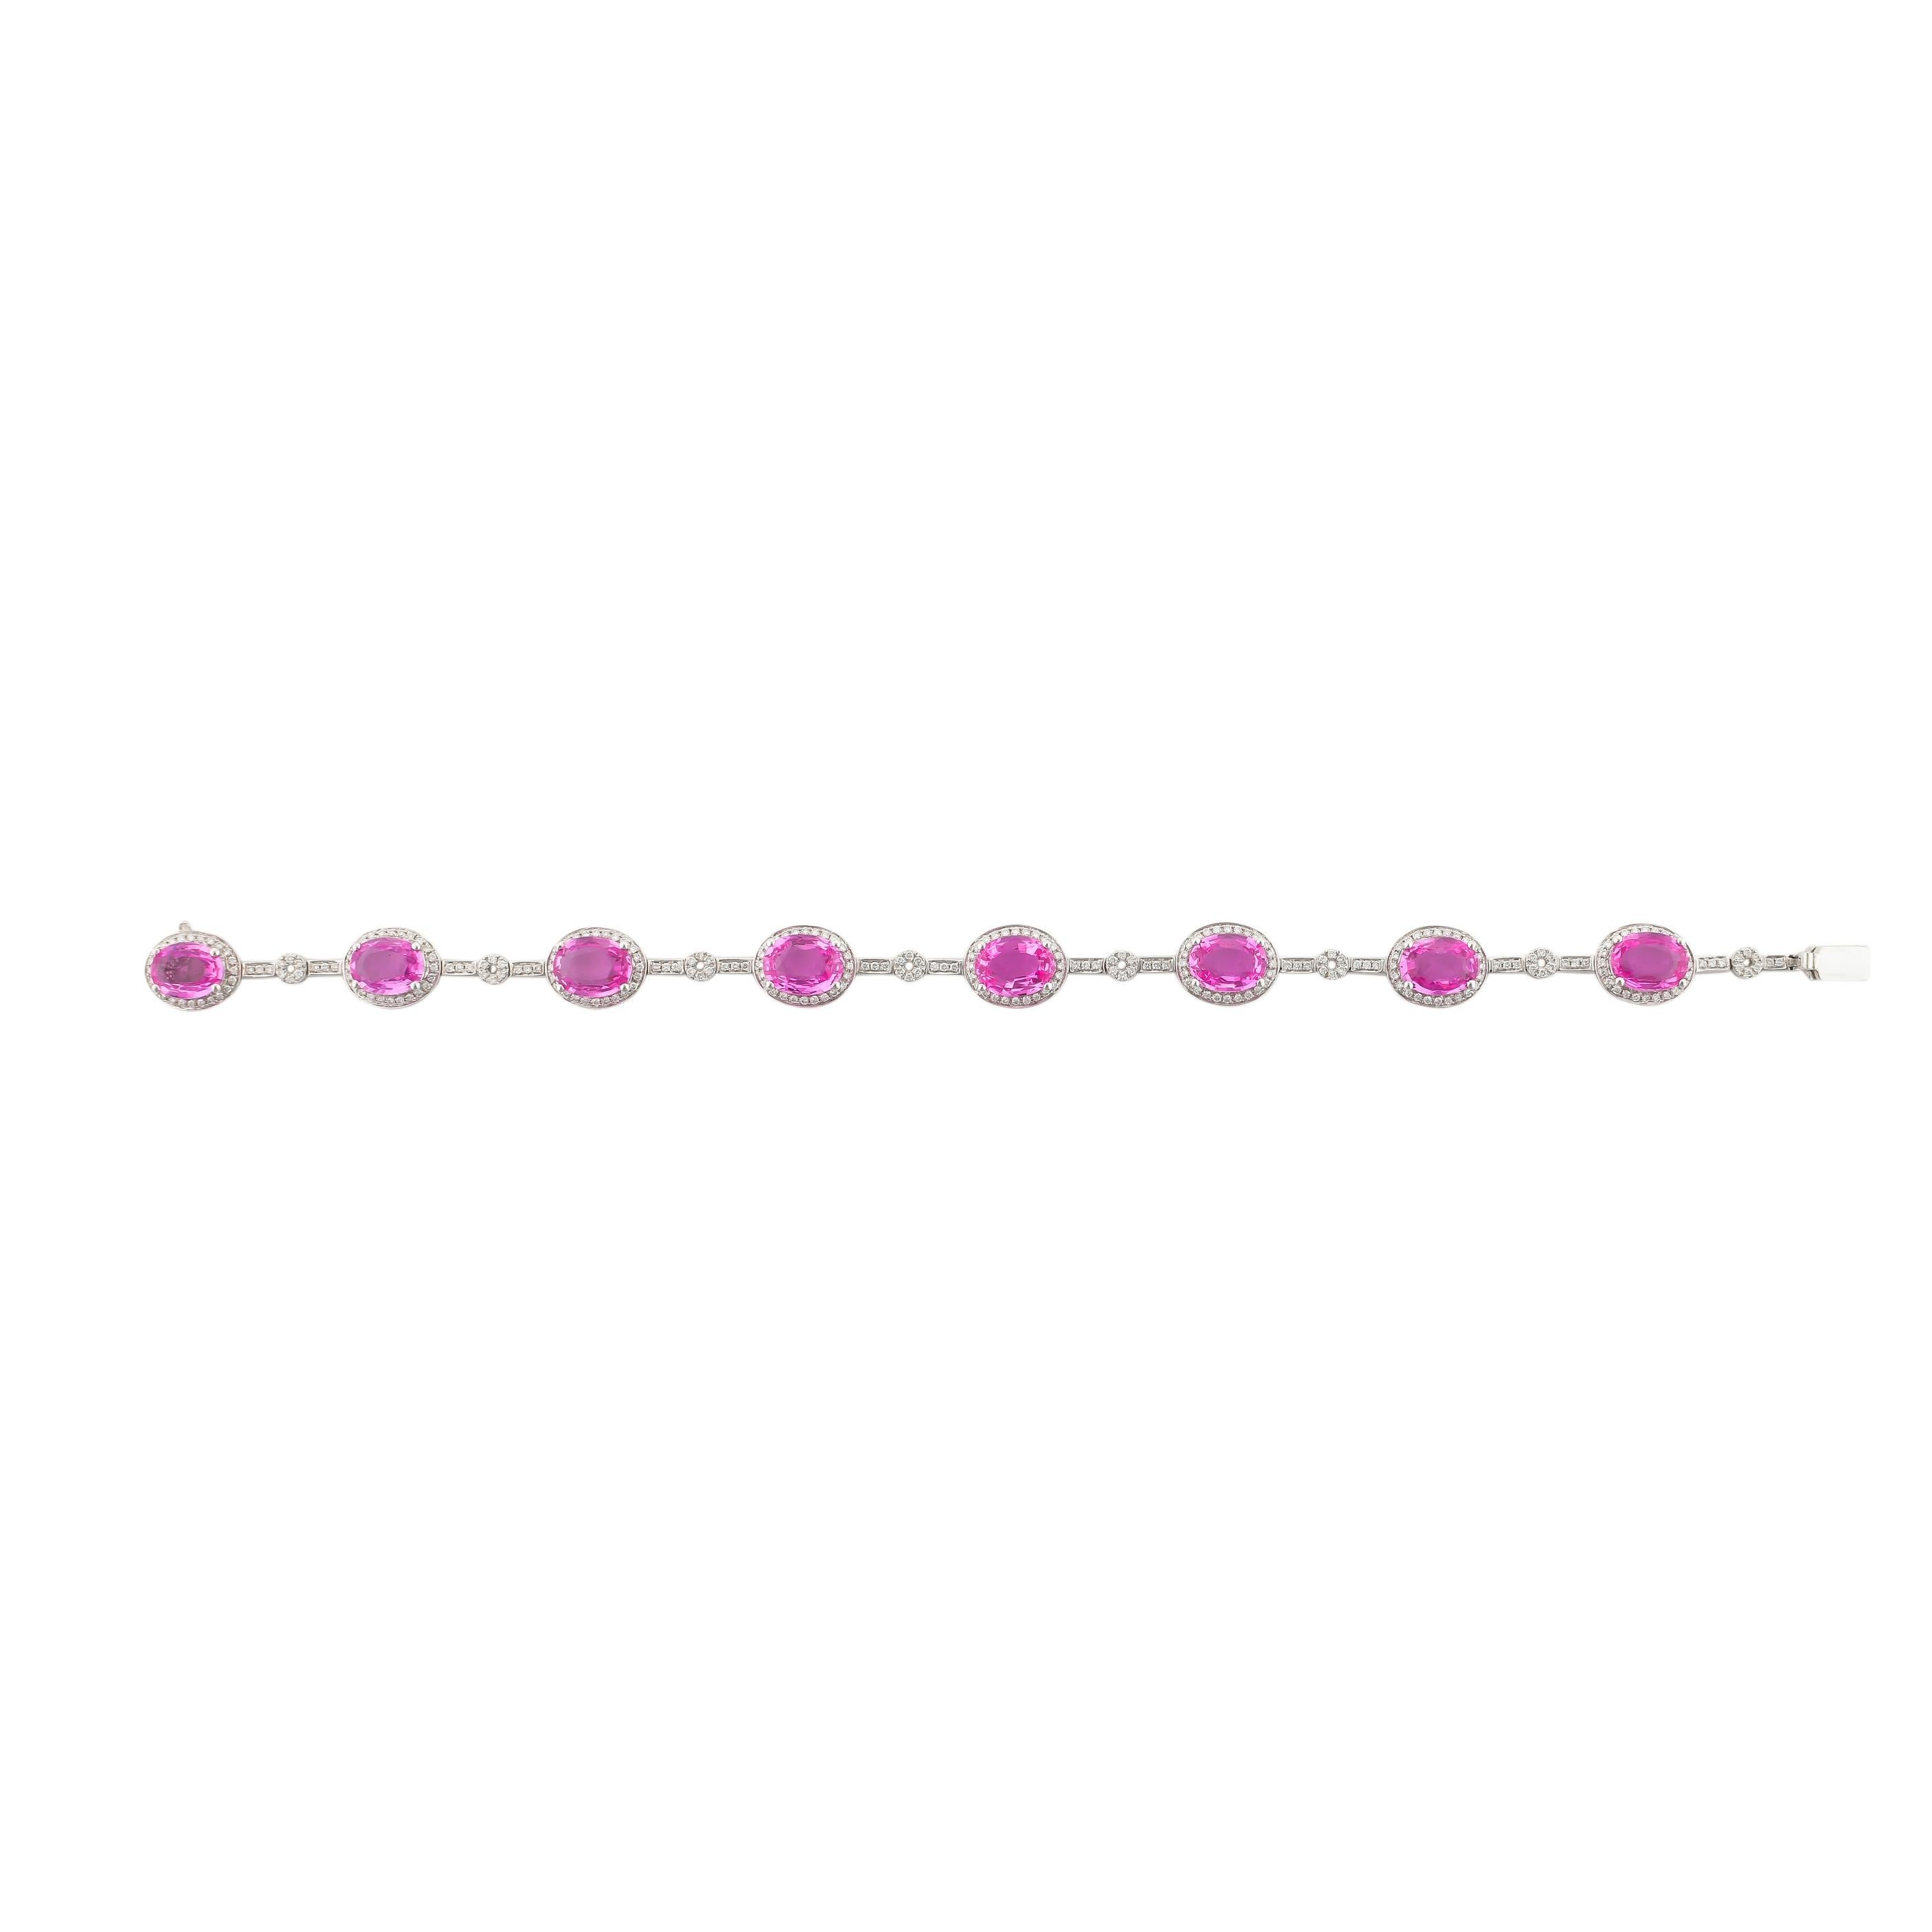 If you like to indulge in sweets, then you're definitely going to fall in love with 
 these candy like 'jelly-bean' sapphires! This particular bracelet showcases dazzling pink sapphires that are almost candy like! 

Designer pink sapphire bracelet